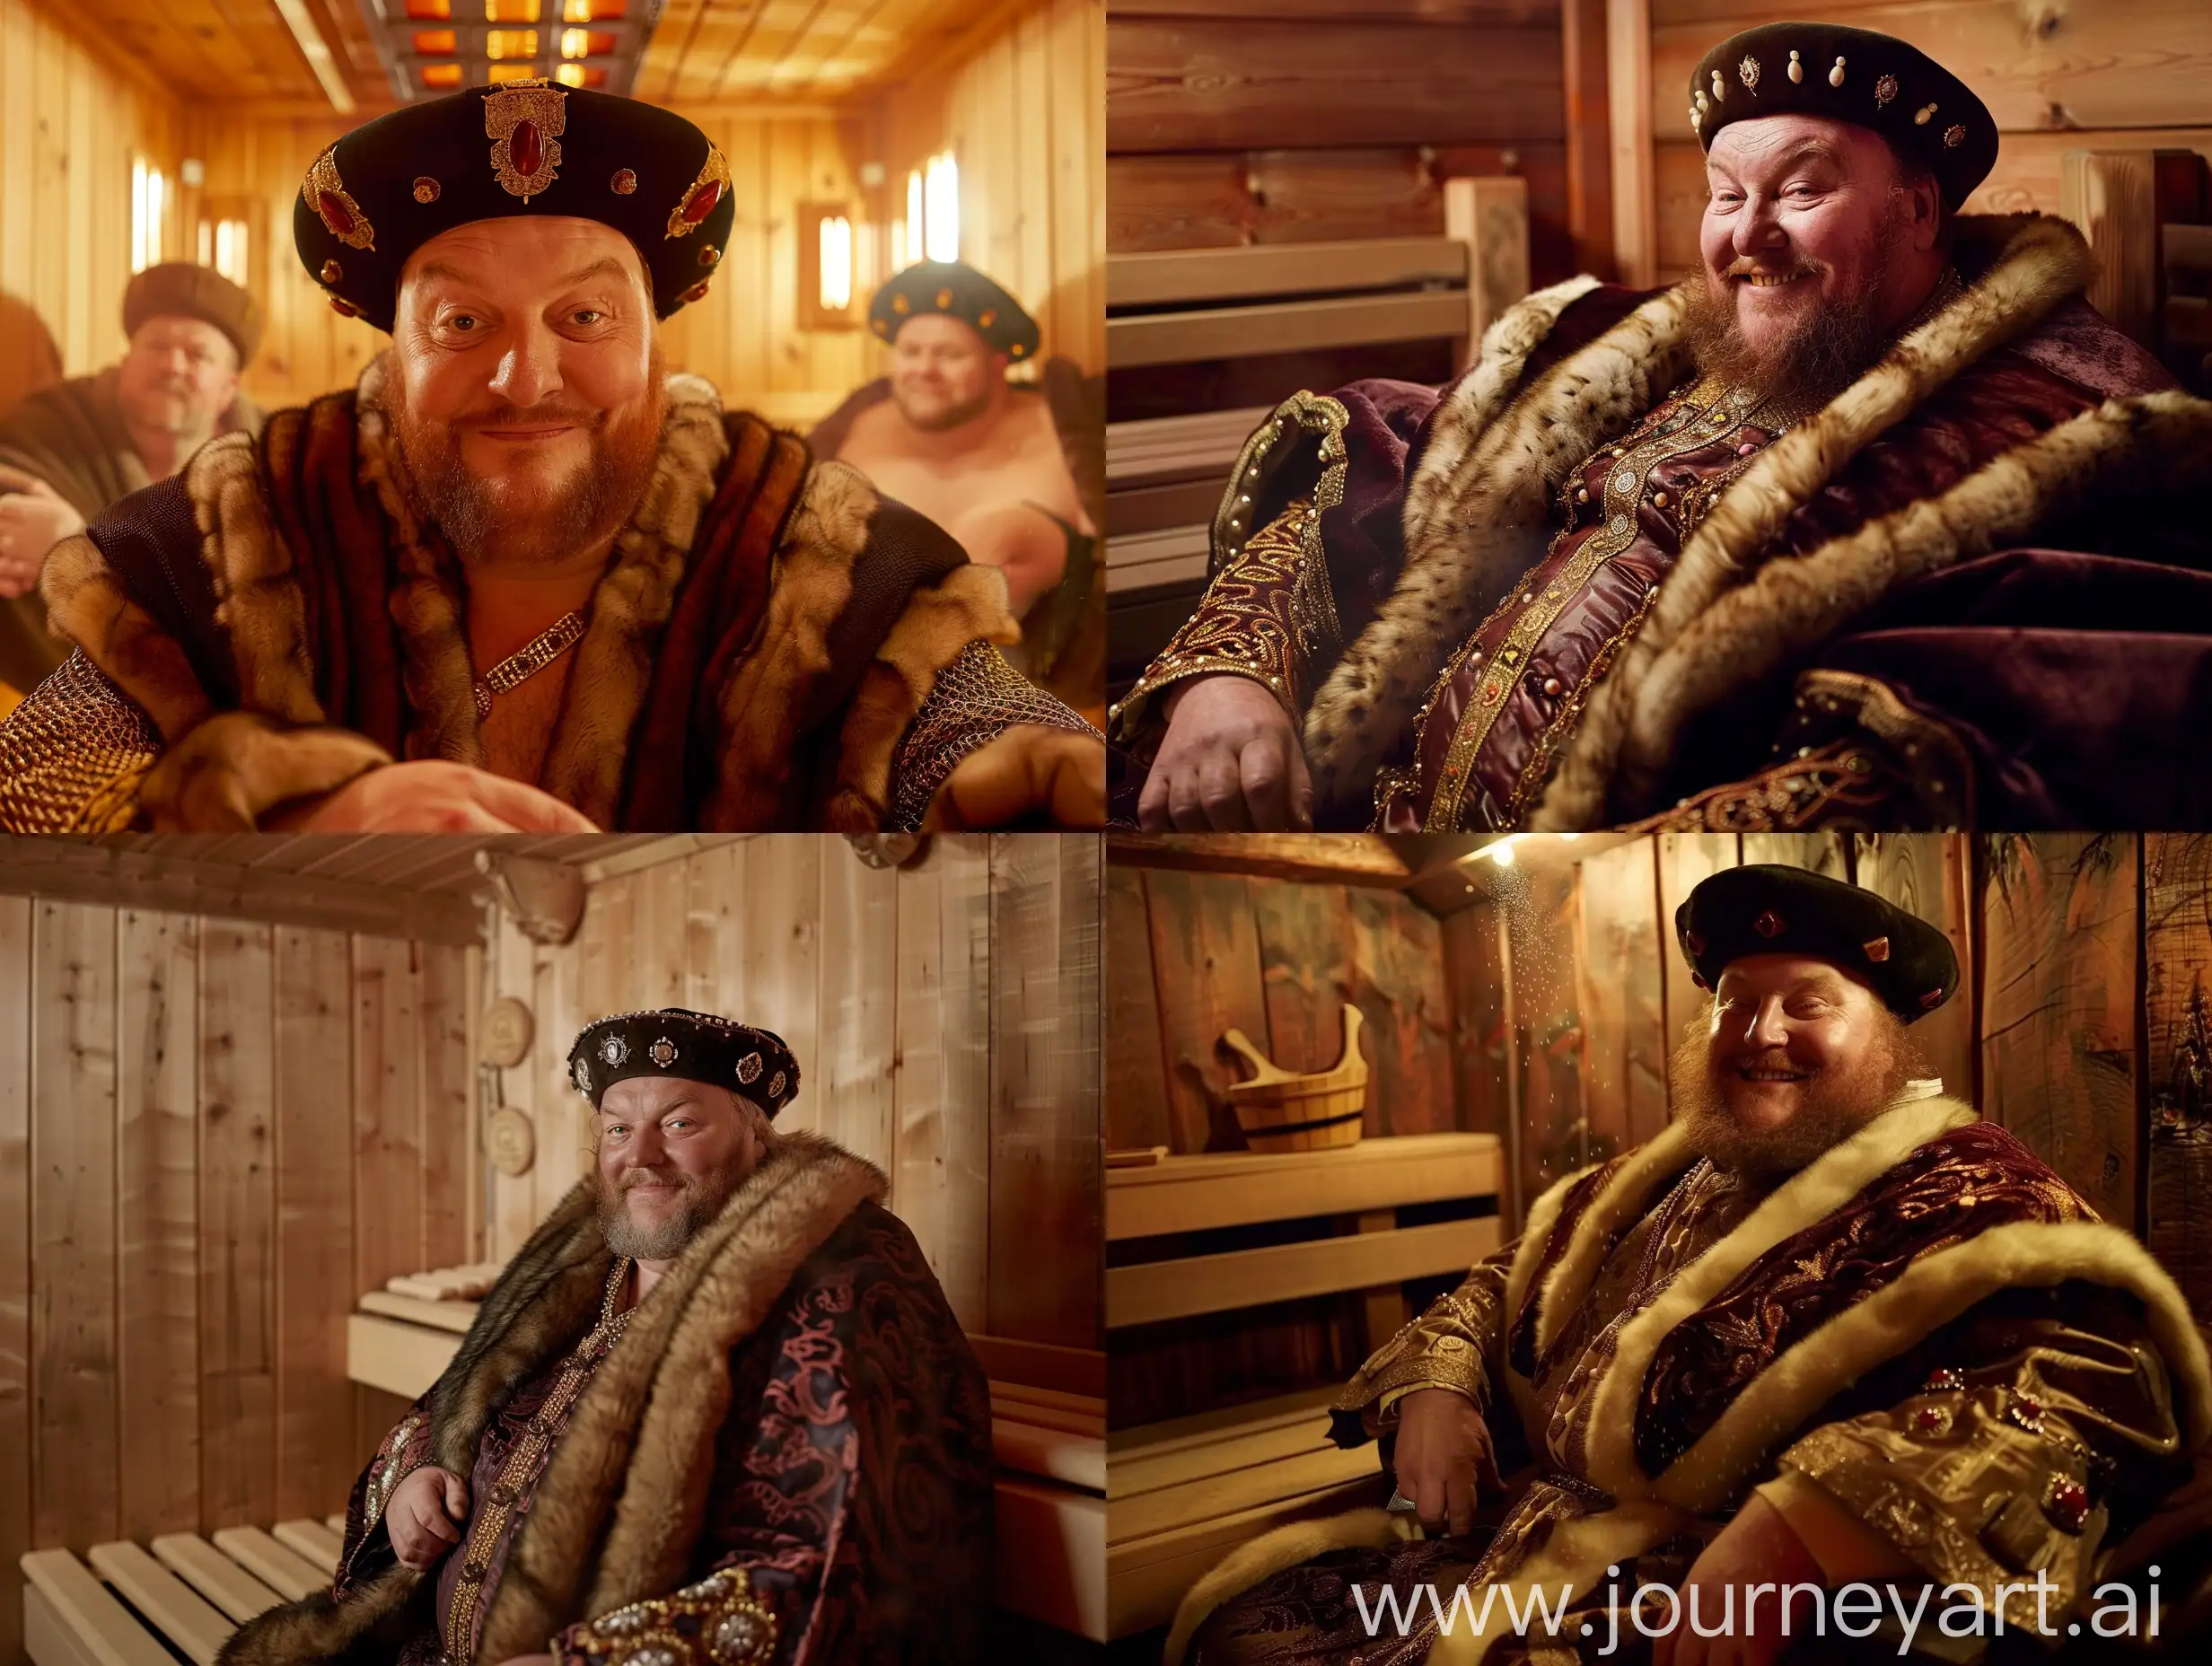 King-Henry-VIII-Grinning-in-a-Sauna